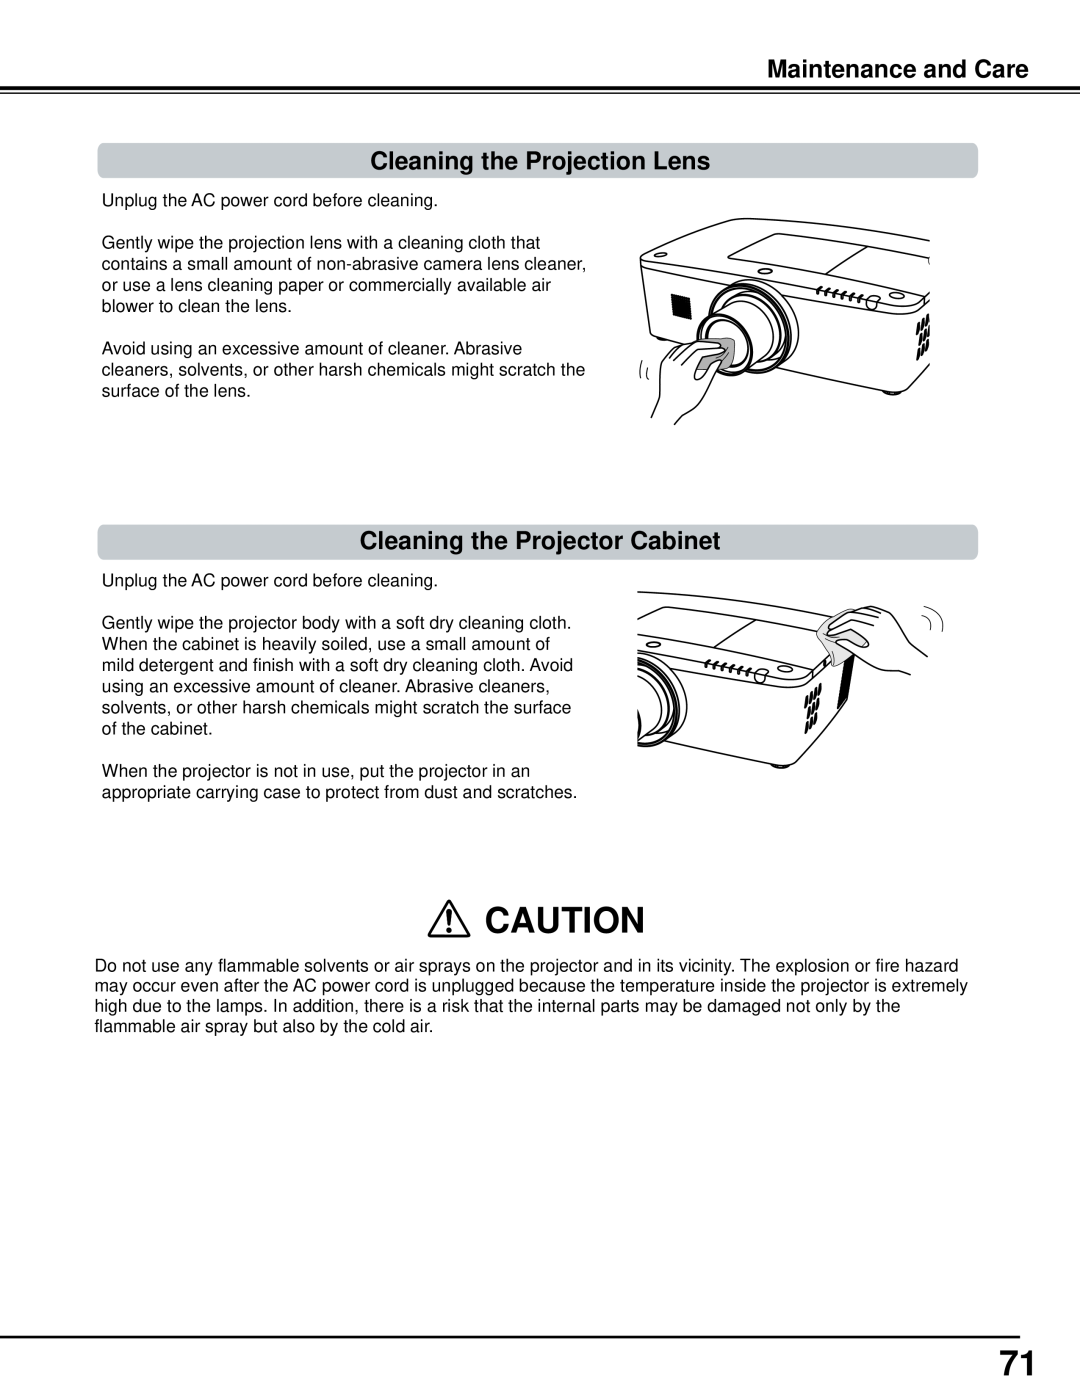 Sanyo PLC-WM5500, WM5500L owner manual Maintenance and Care Cleaning the Projection Lens, Cleaning the Projector Cabinet 